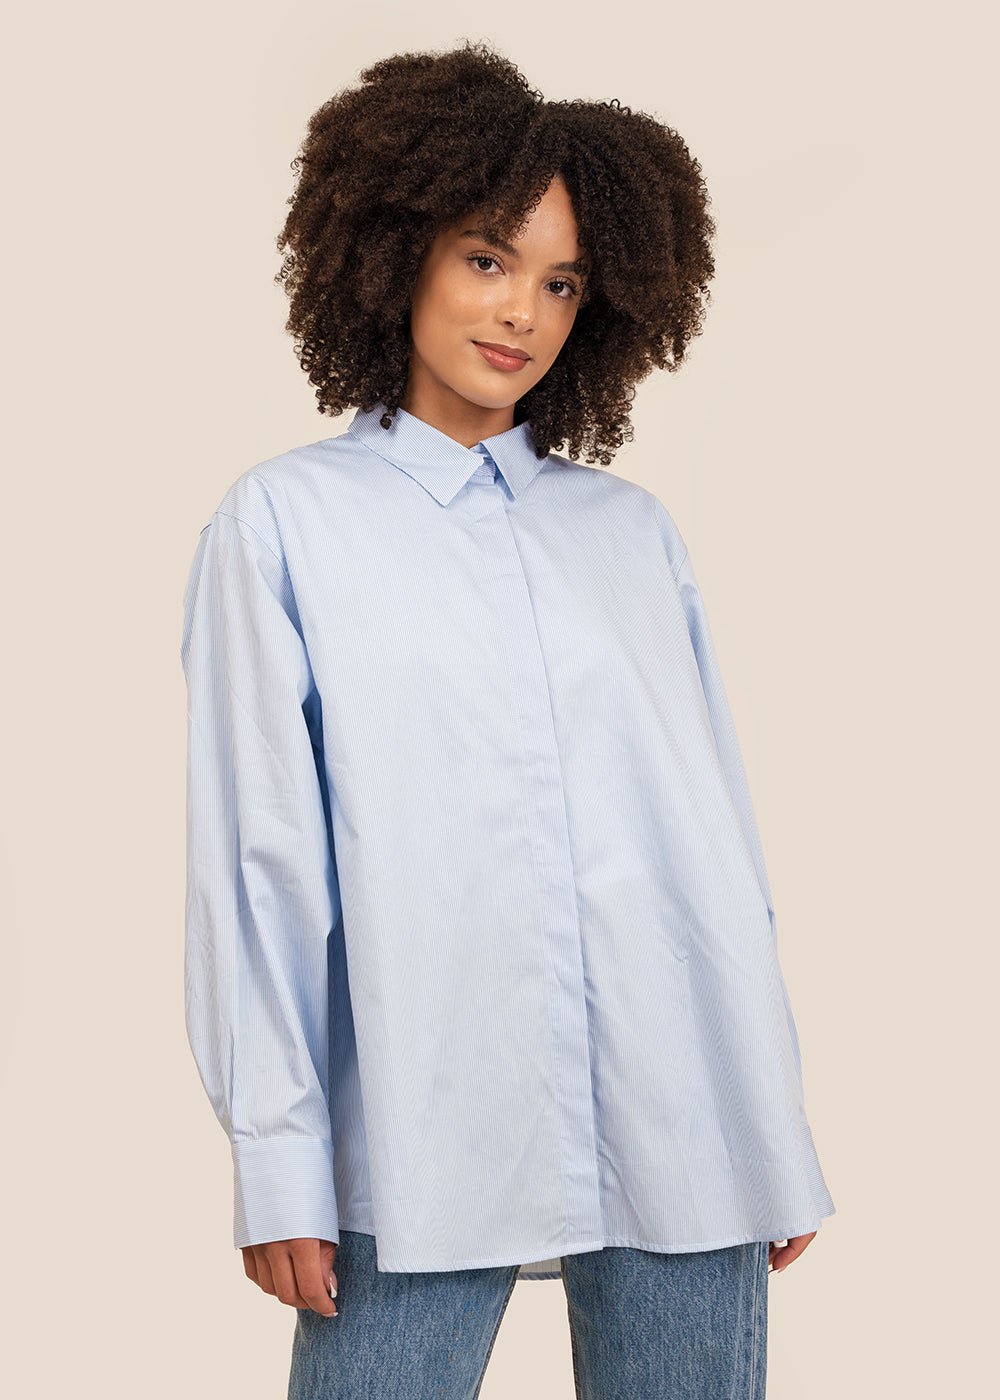 Stylein Striped Jeanne Shirt - New Classics Studios Sustainable Ethical Fashion Canada